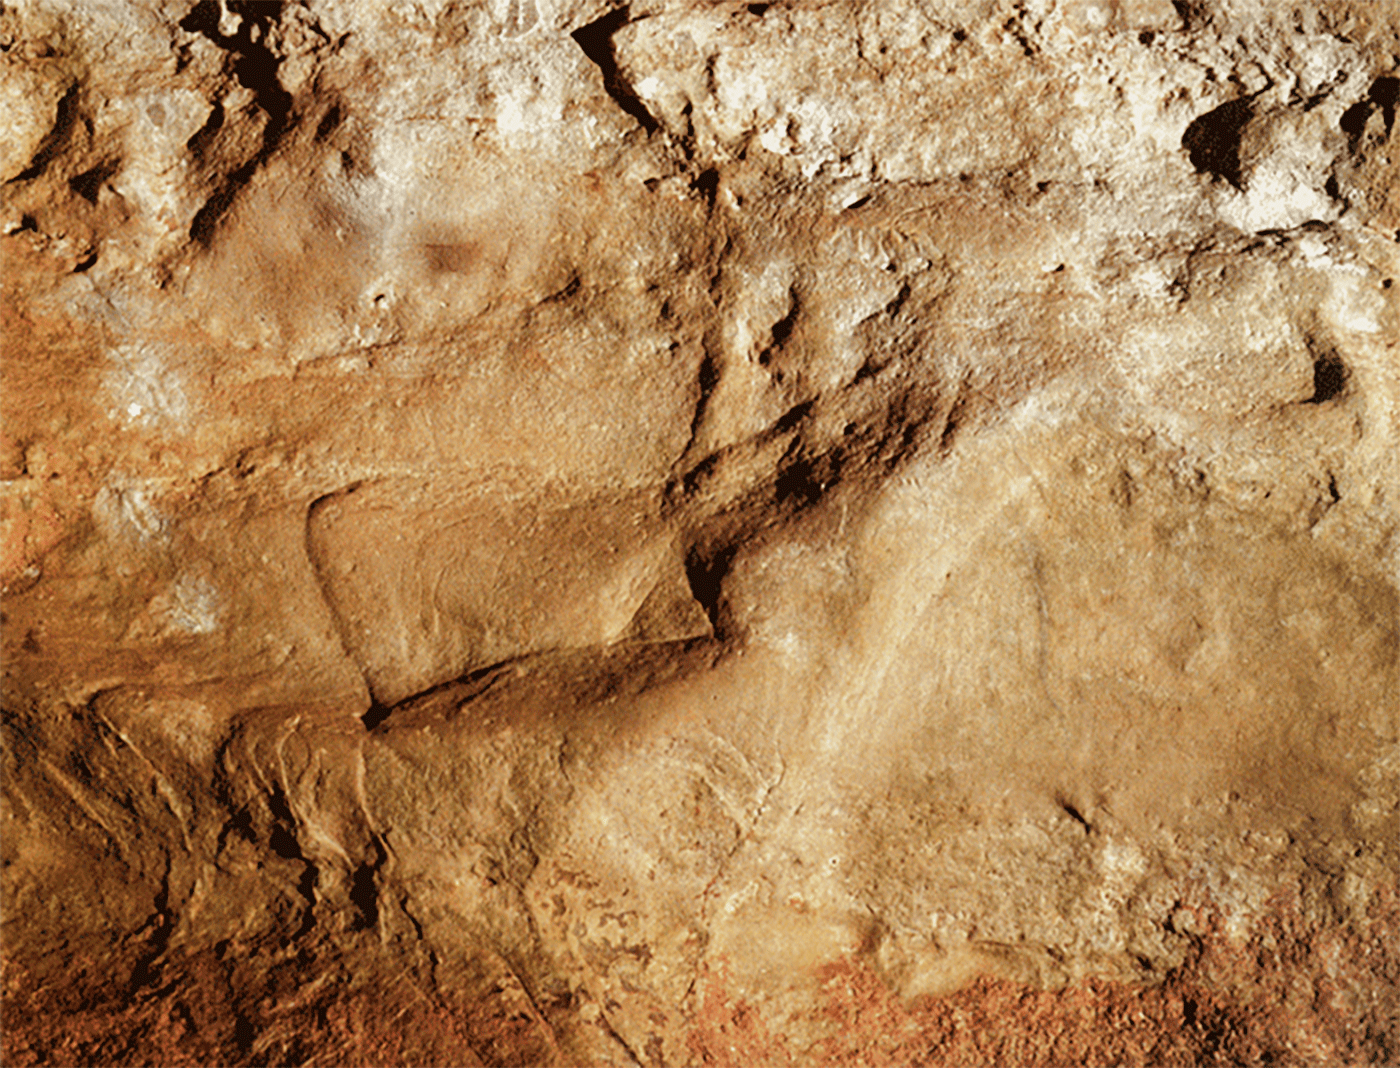 Reclining woman from La Magdelaine des Albis Cave, Penne, Tarn, France